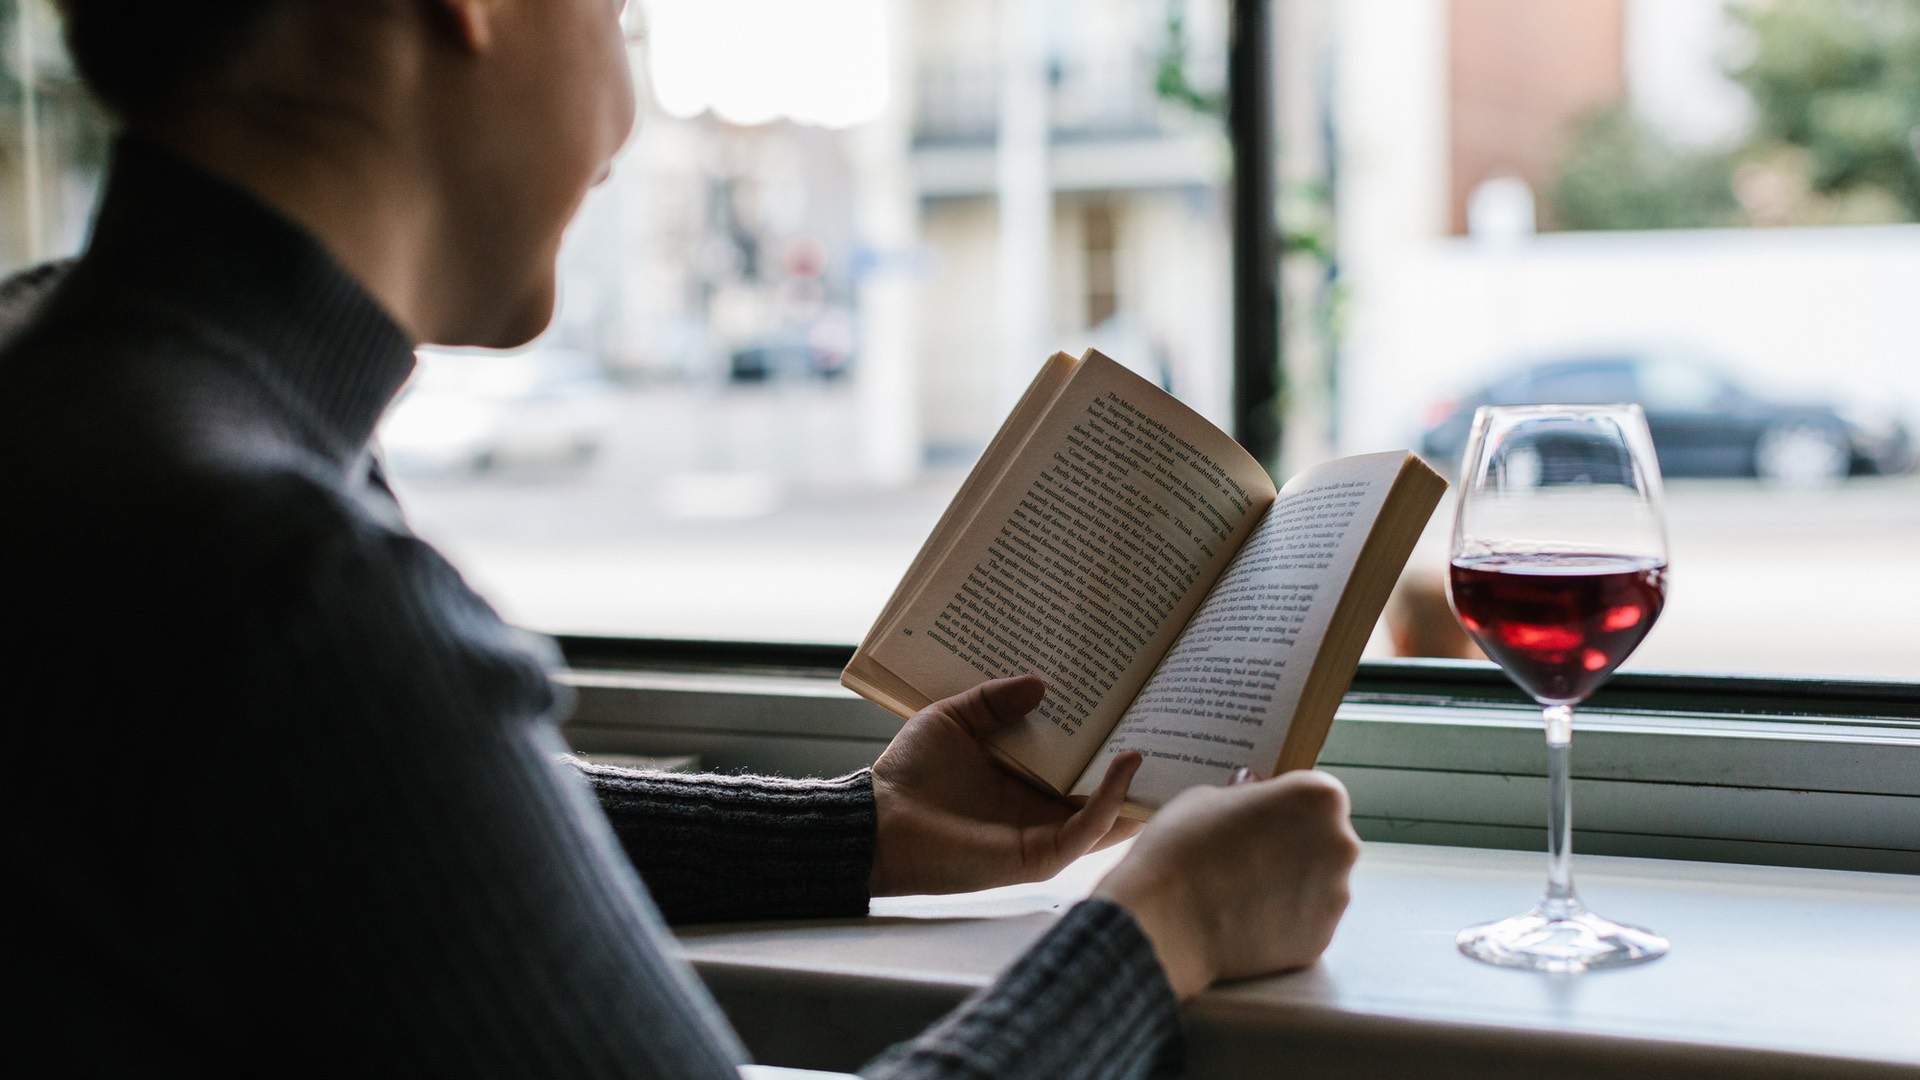 Melbourne Bars Where You Can Drink Alone with a Book